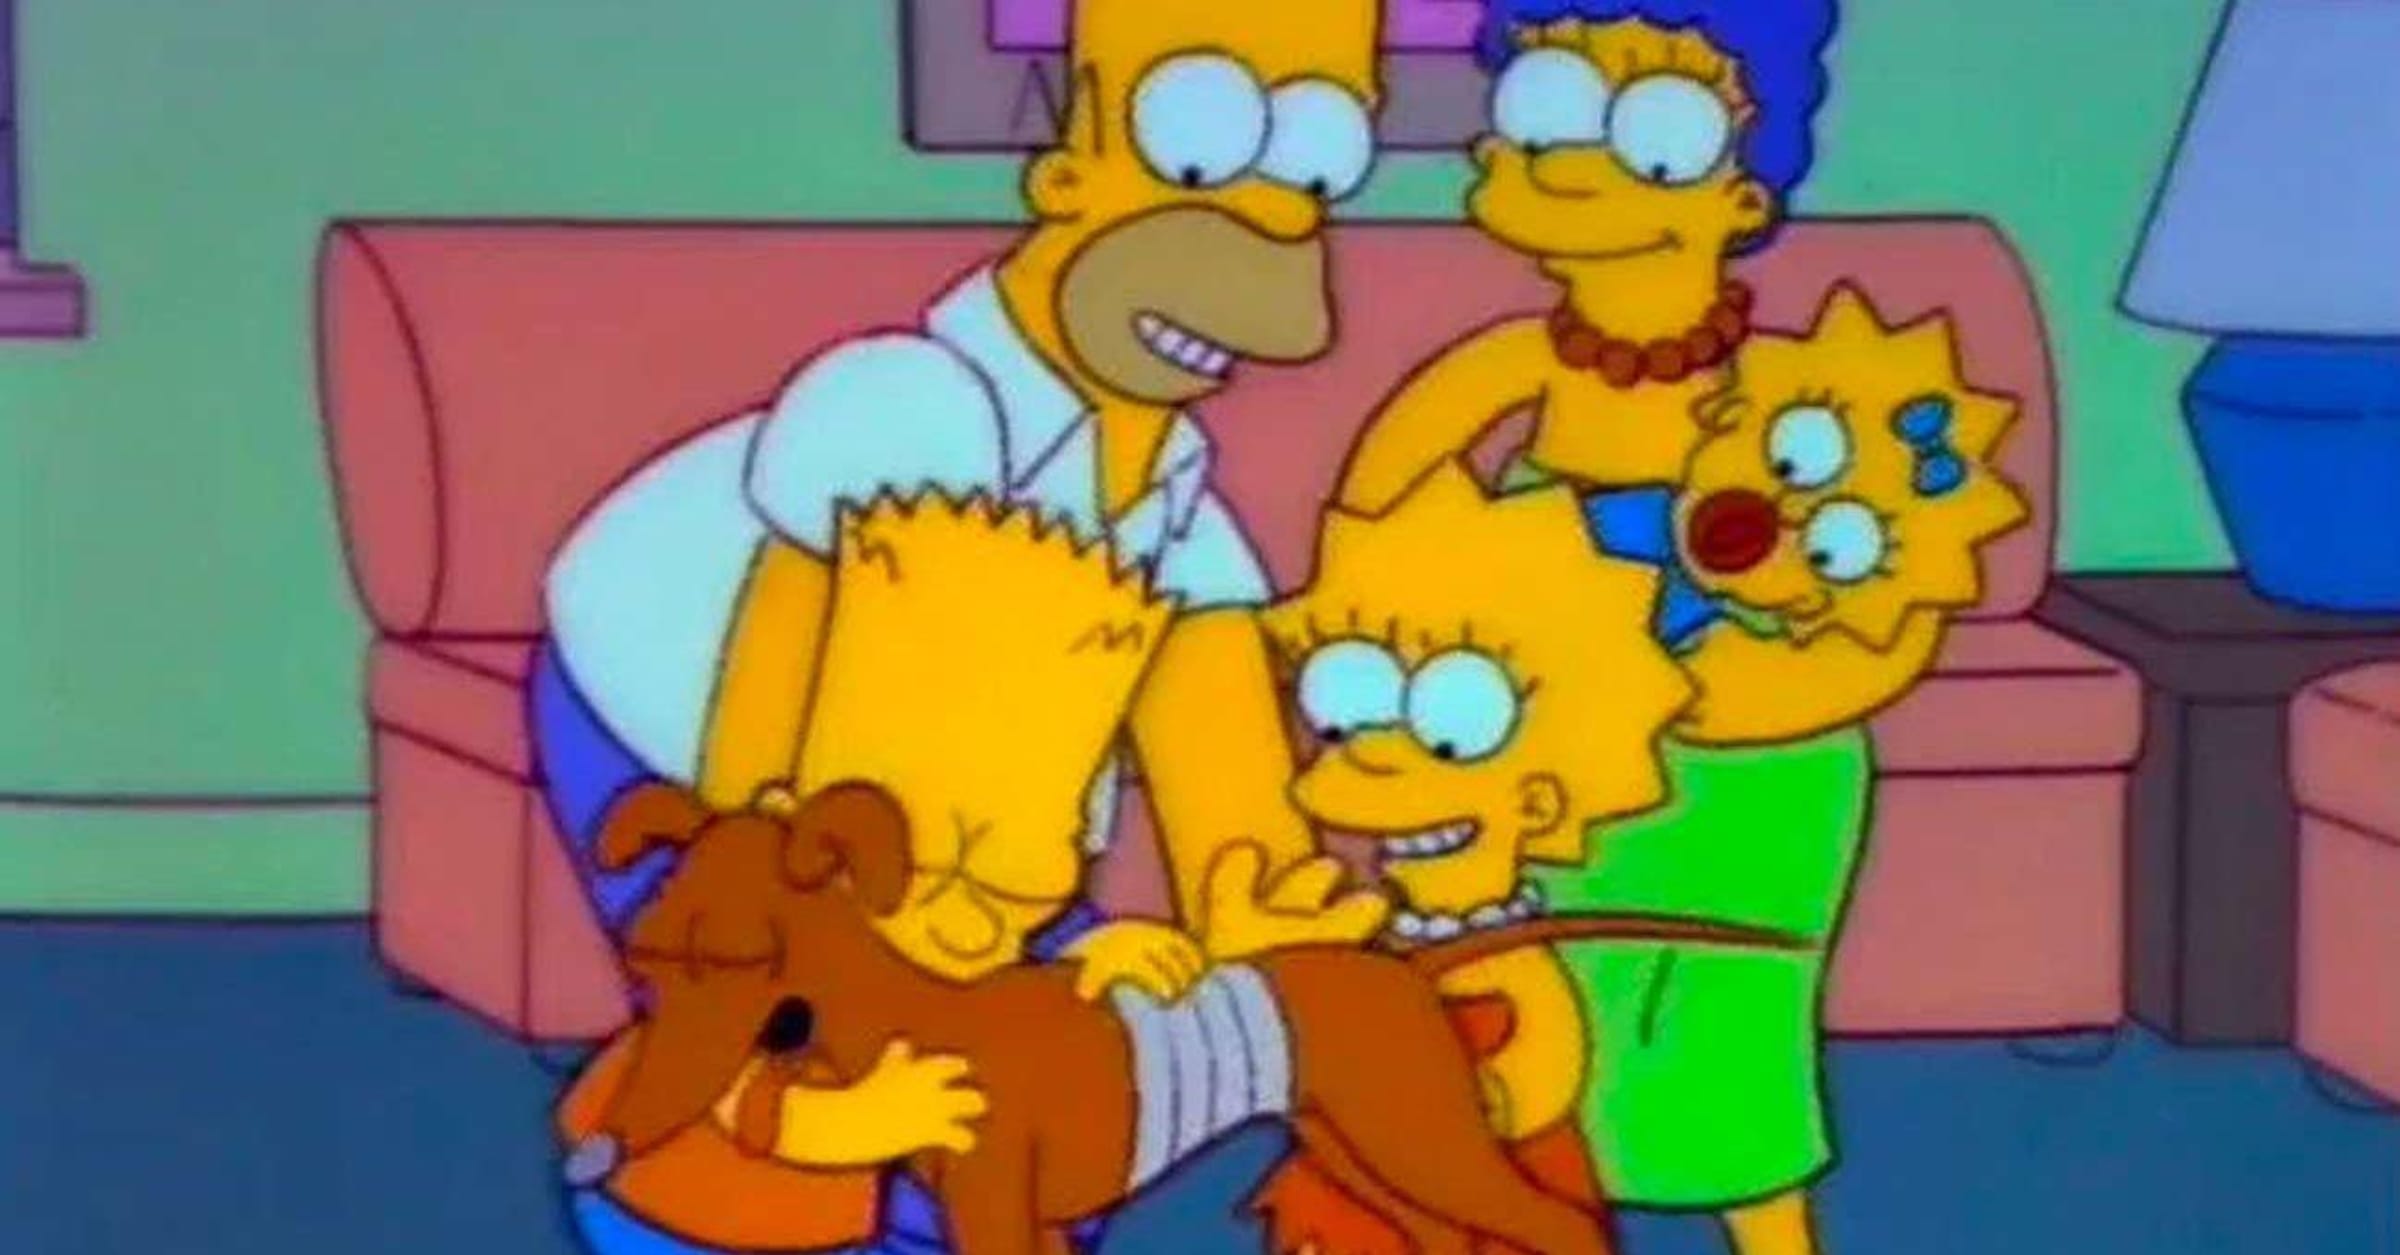 Bart the Mother' – The Last 'Real' Episode of The Simpsons?